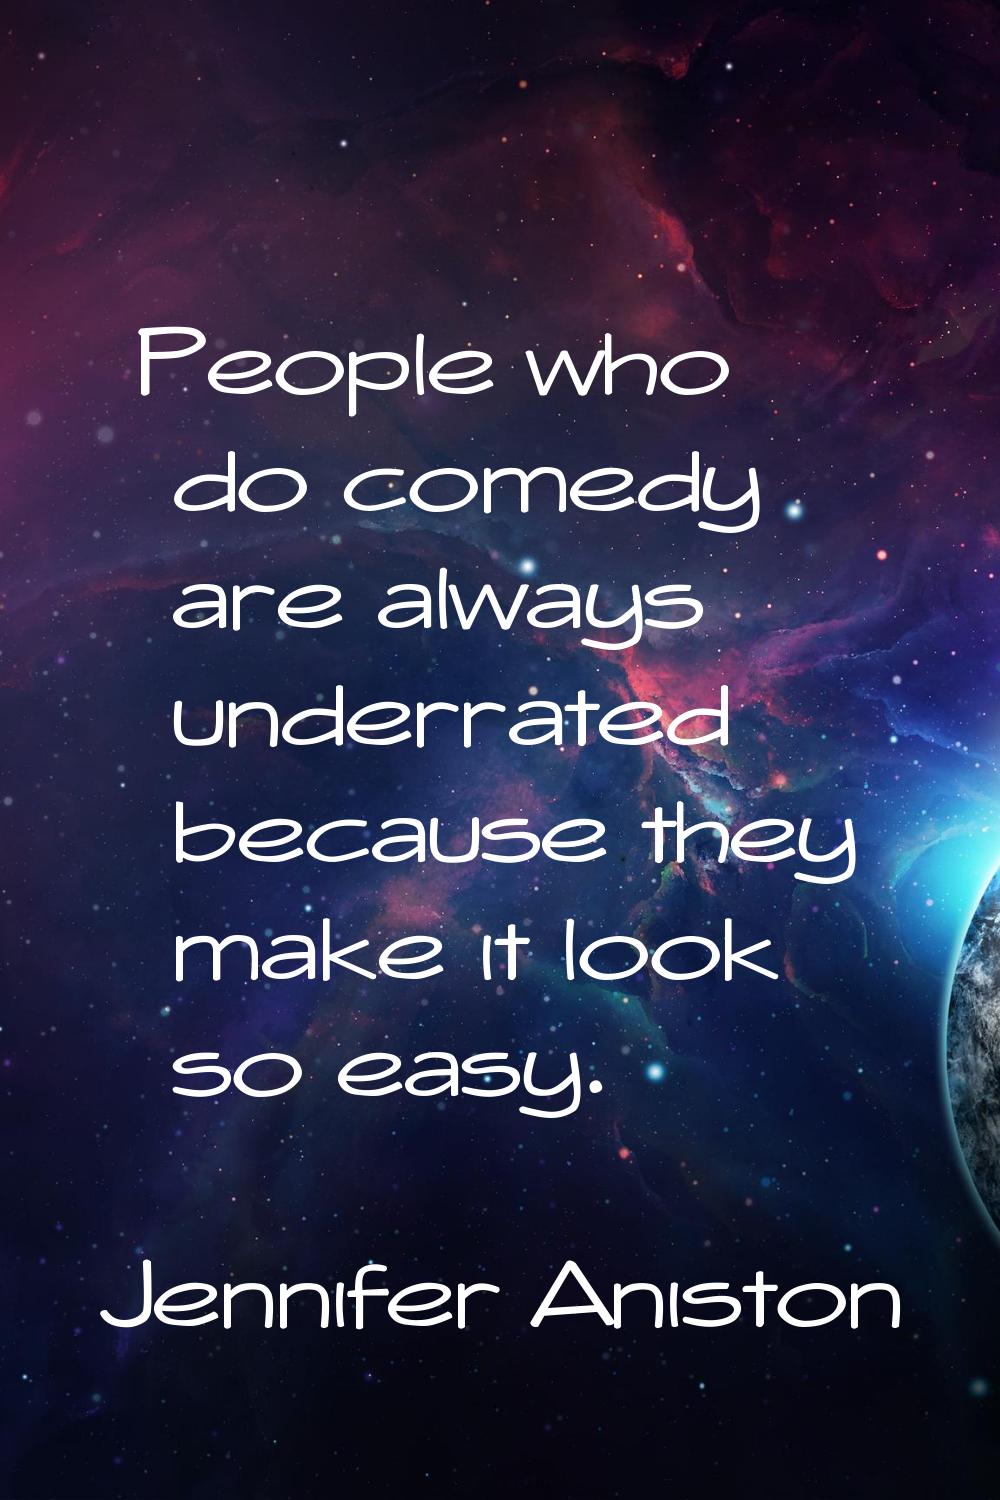 People who do comedy are always underrated because they make it look so easy.